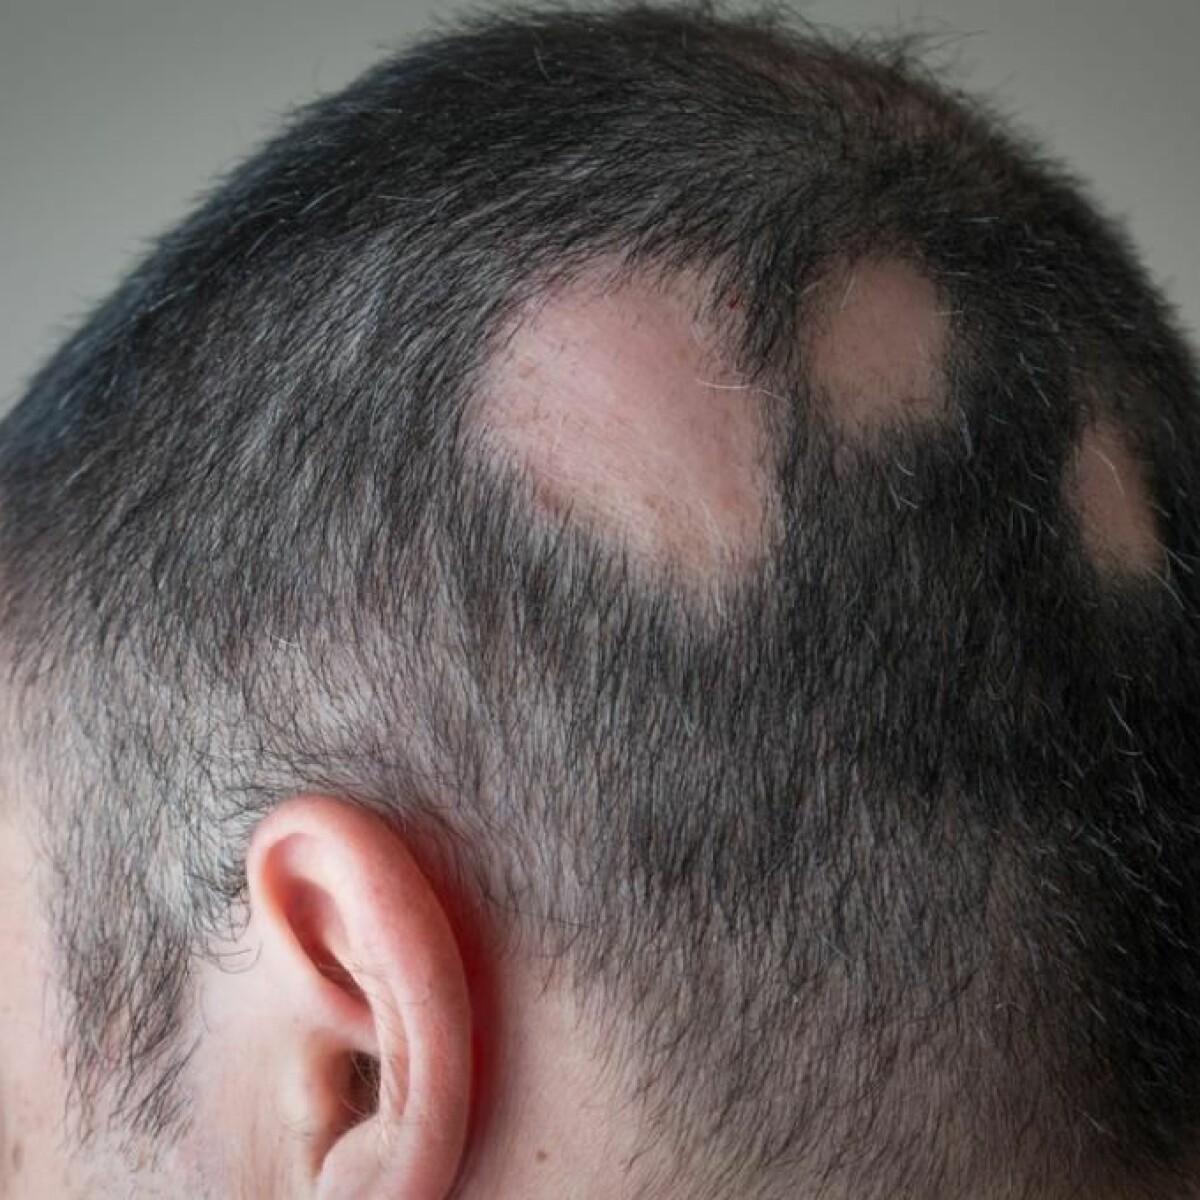 Pattern hair loss could be due to gut bacteria